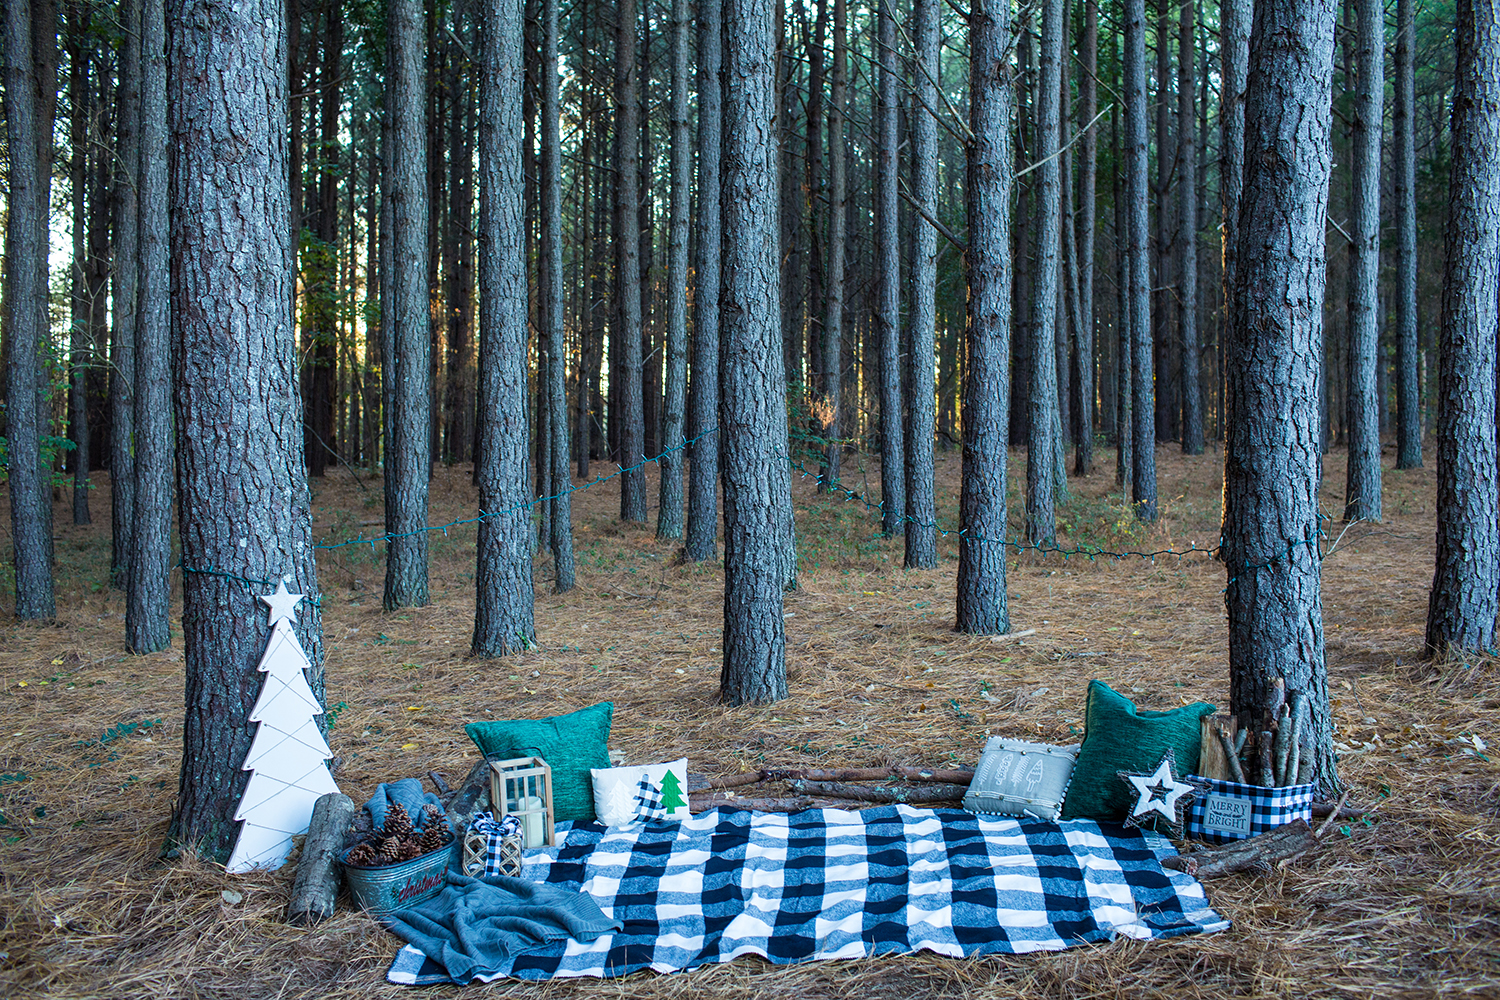 back drop setting a black and white plaid blanket with decorative green pillows and a wooden Christmas tree